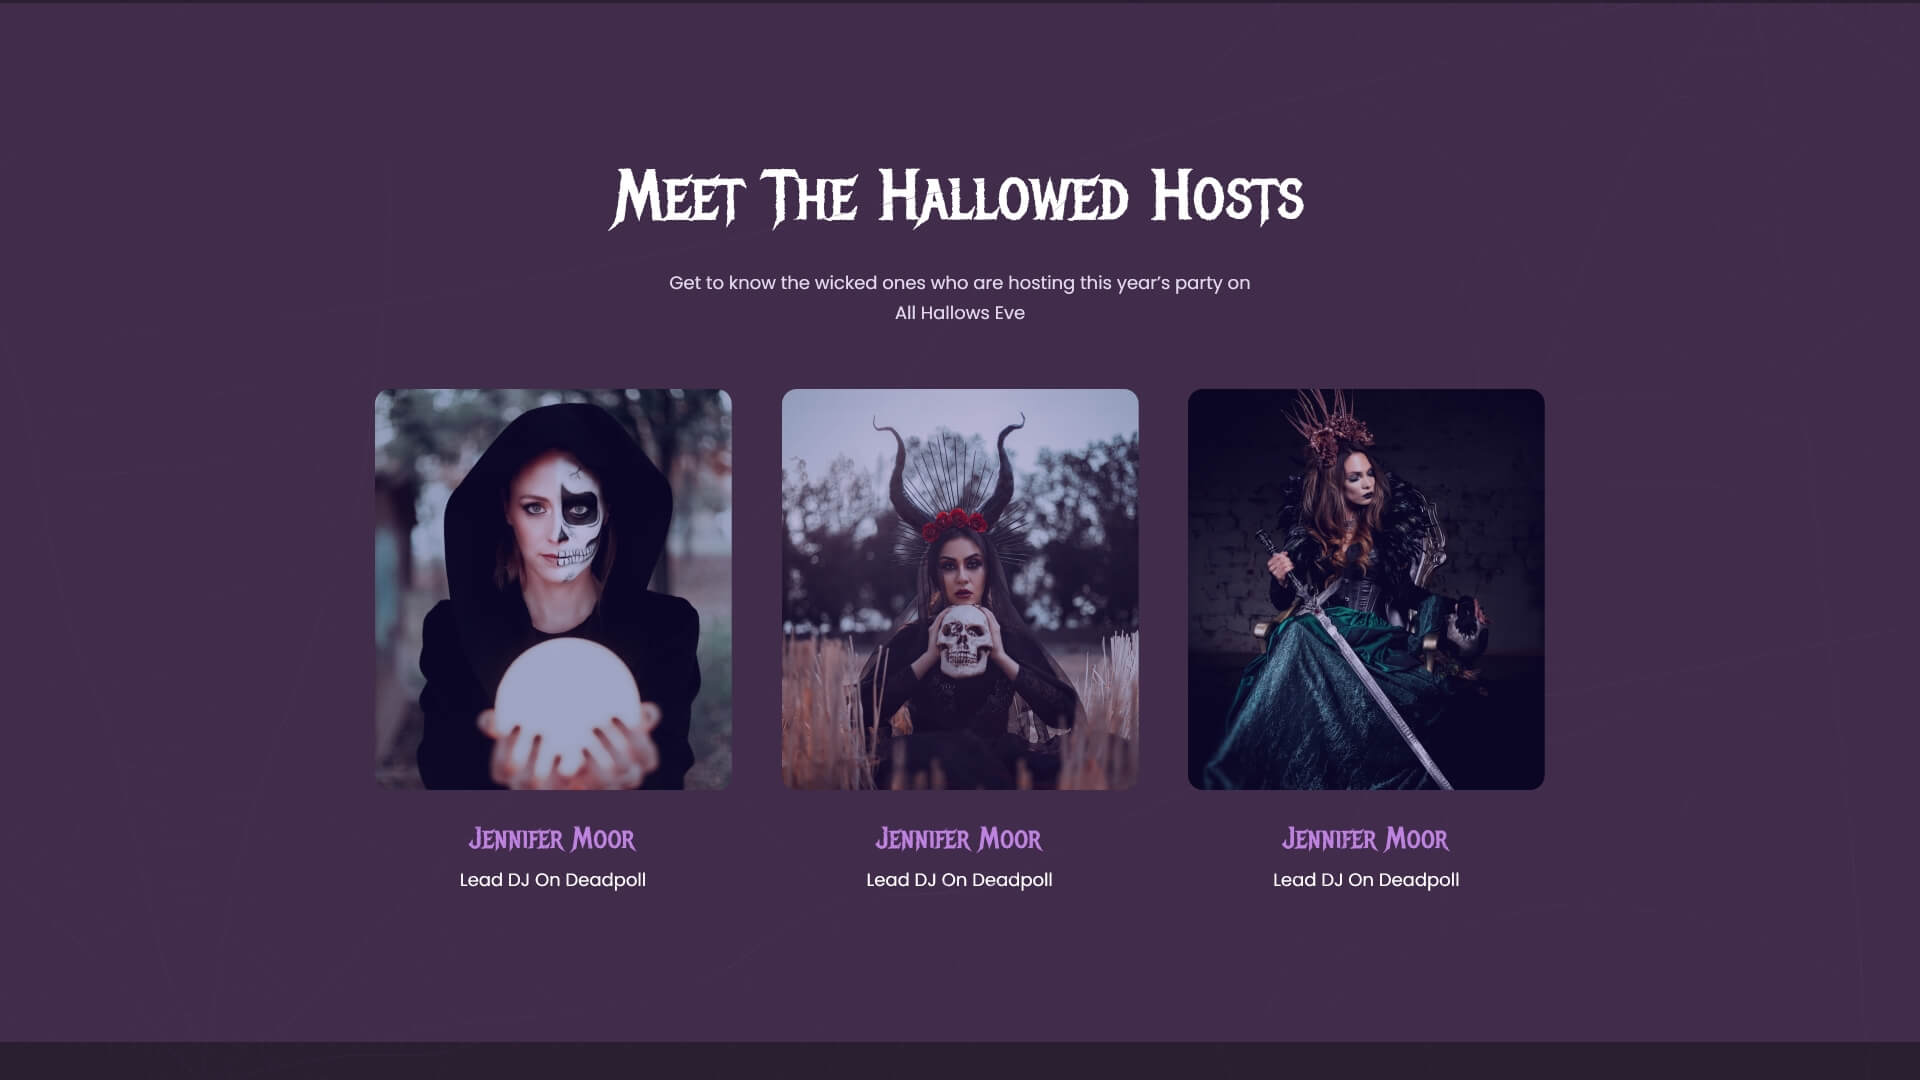 How To Create A Spooky Halloween Website With 1 Click Using Elementor Ready Template [Freebies] 13